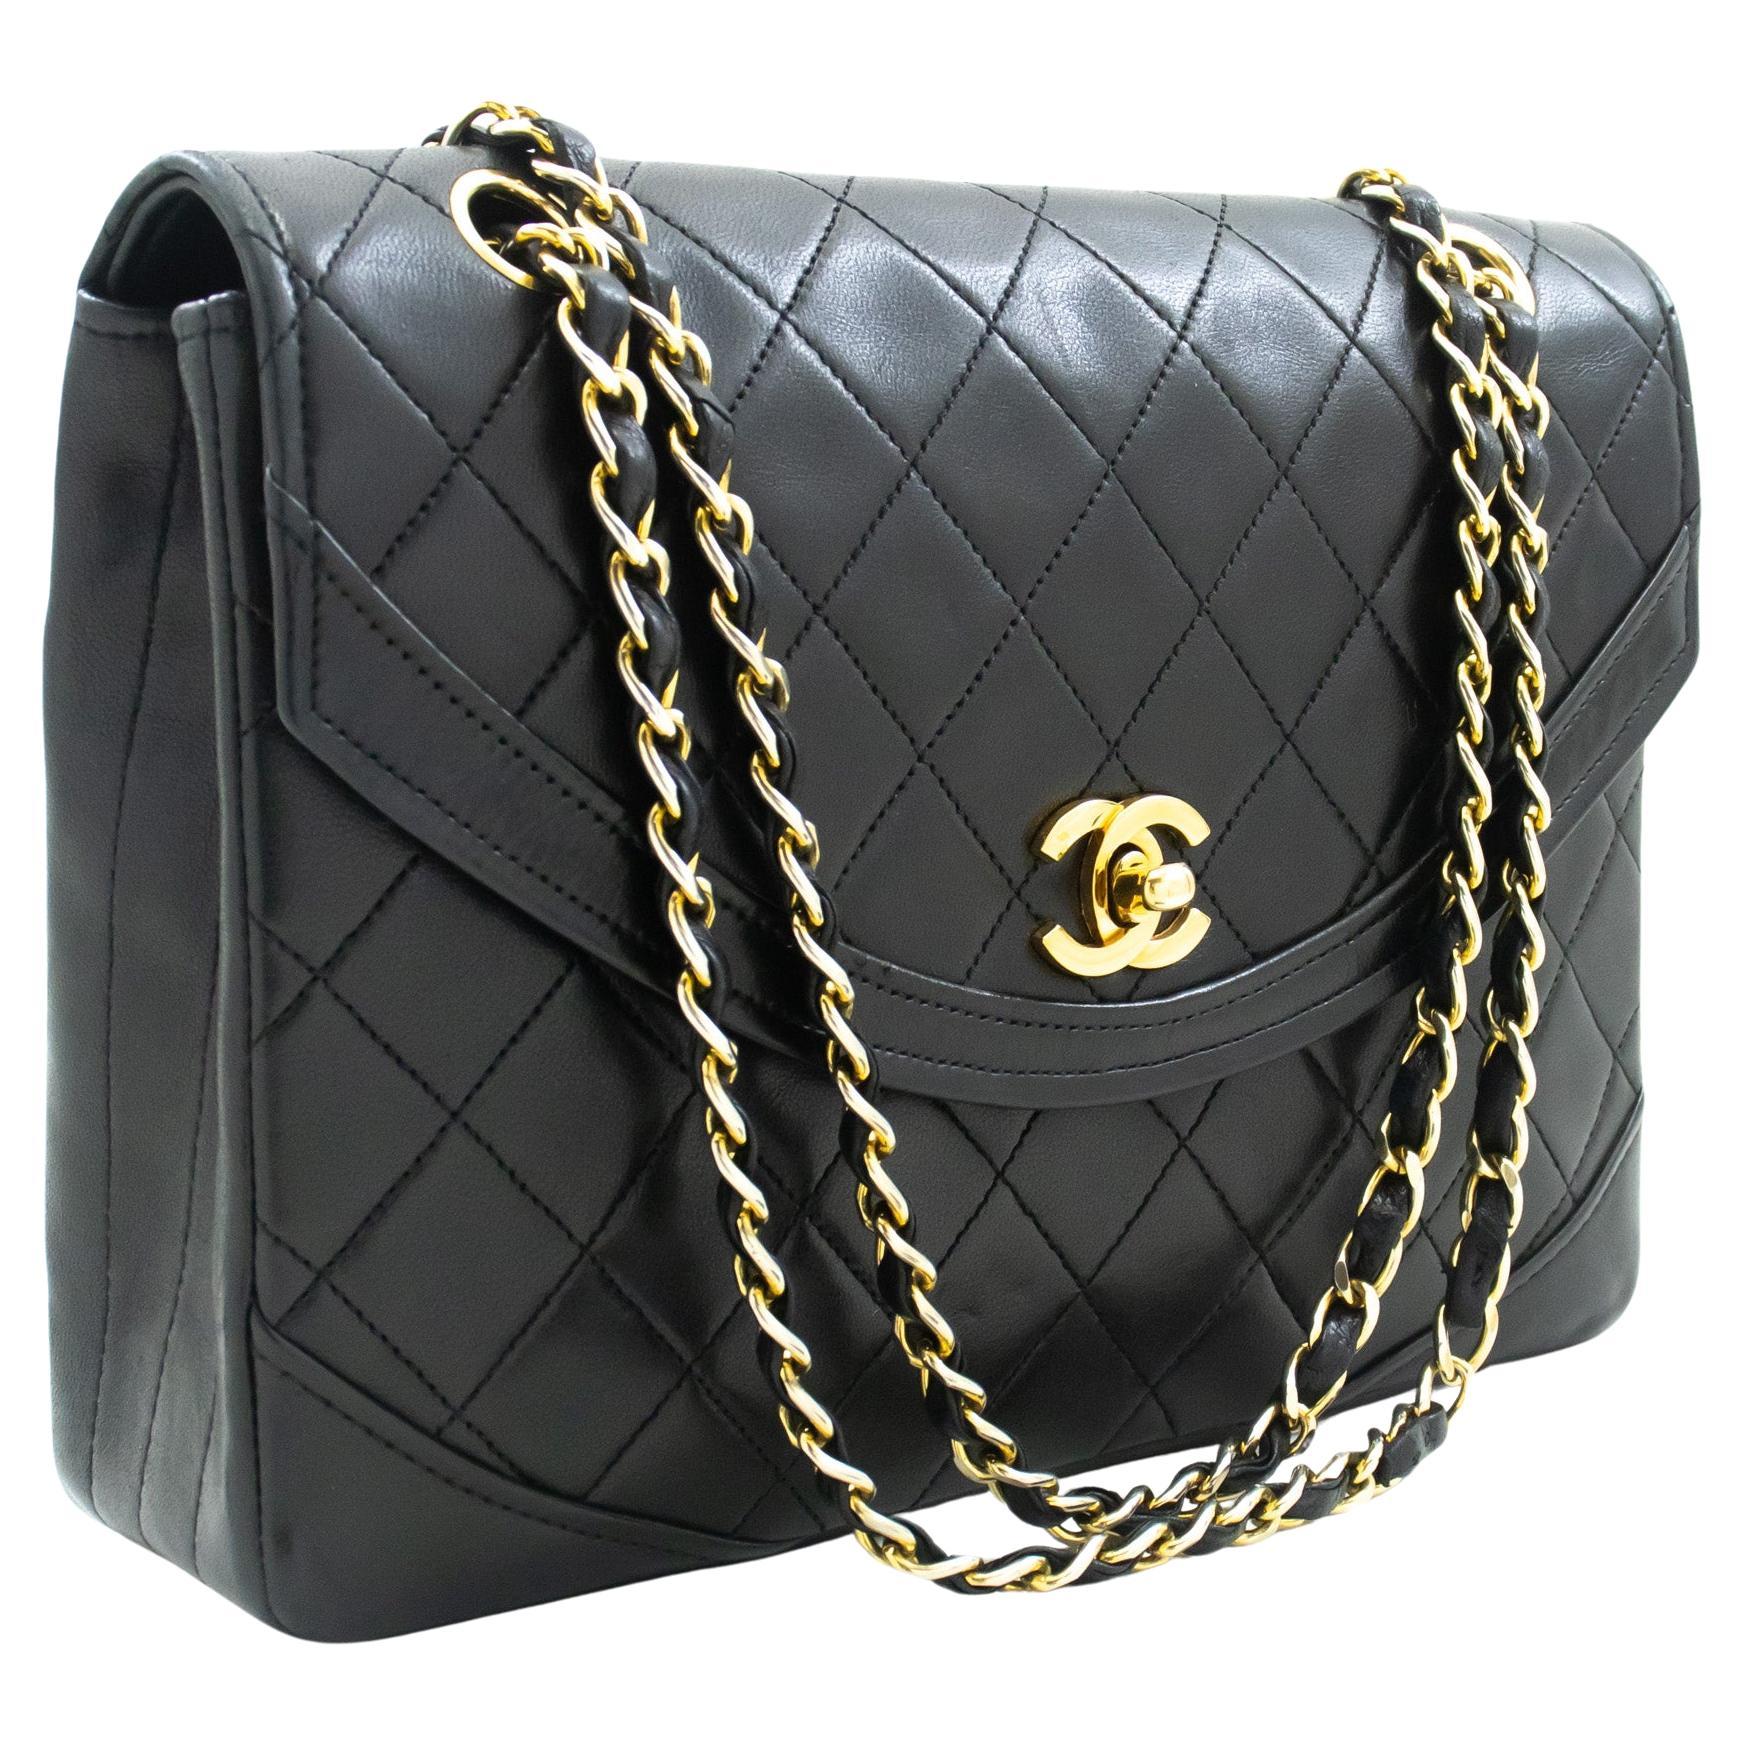 CHANEL Half Moon Chain Shoulder Crossbody Bag Black Flap Quilted For Sale